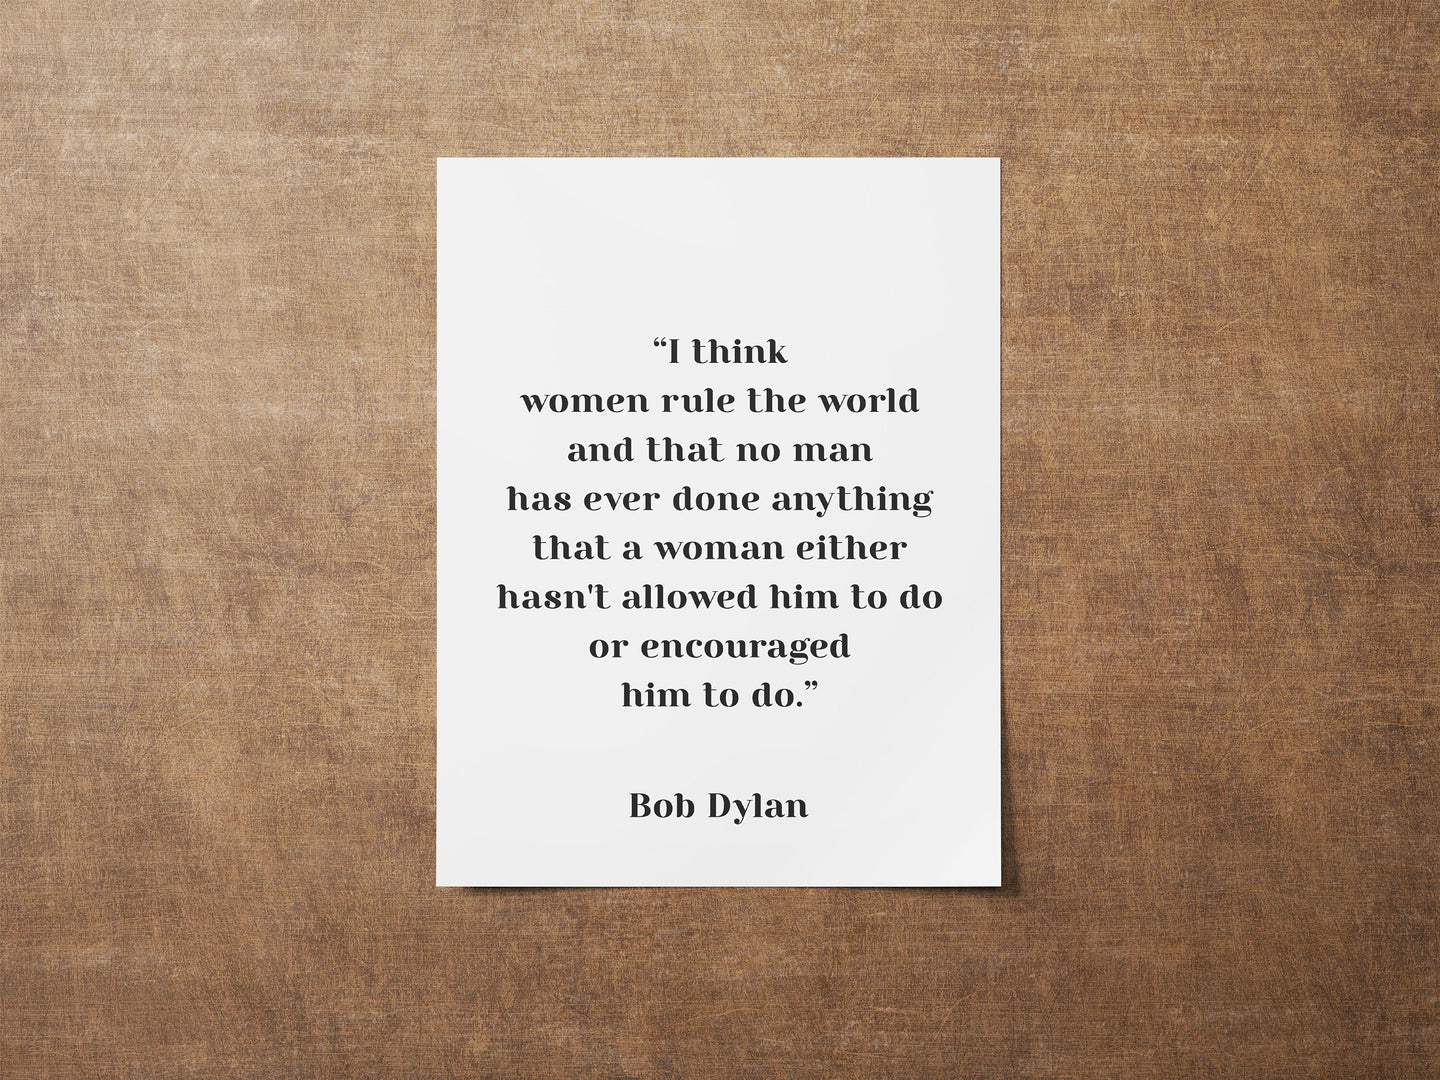 Bob Dylan Quote - I think women rule the world - Unframed wall art print for Home Bob Dylan quote feminist art print UNFRAMED